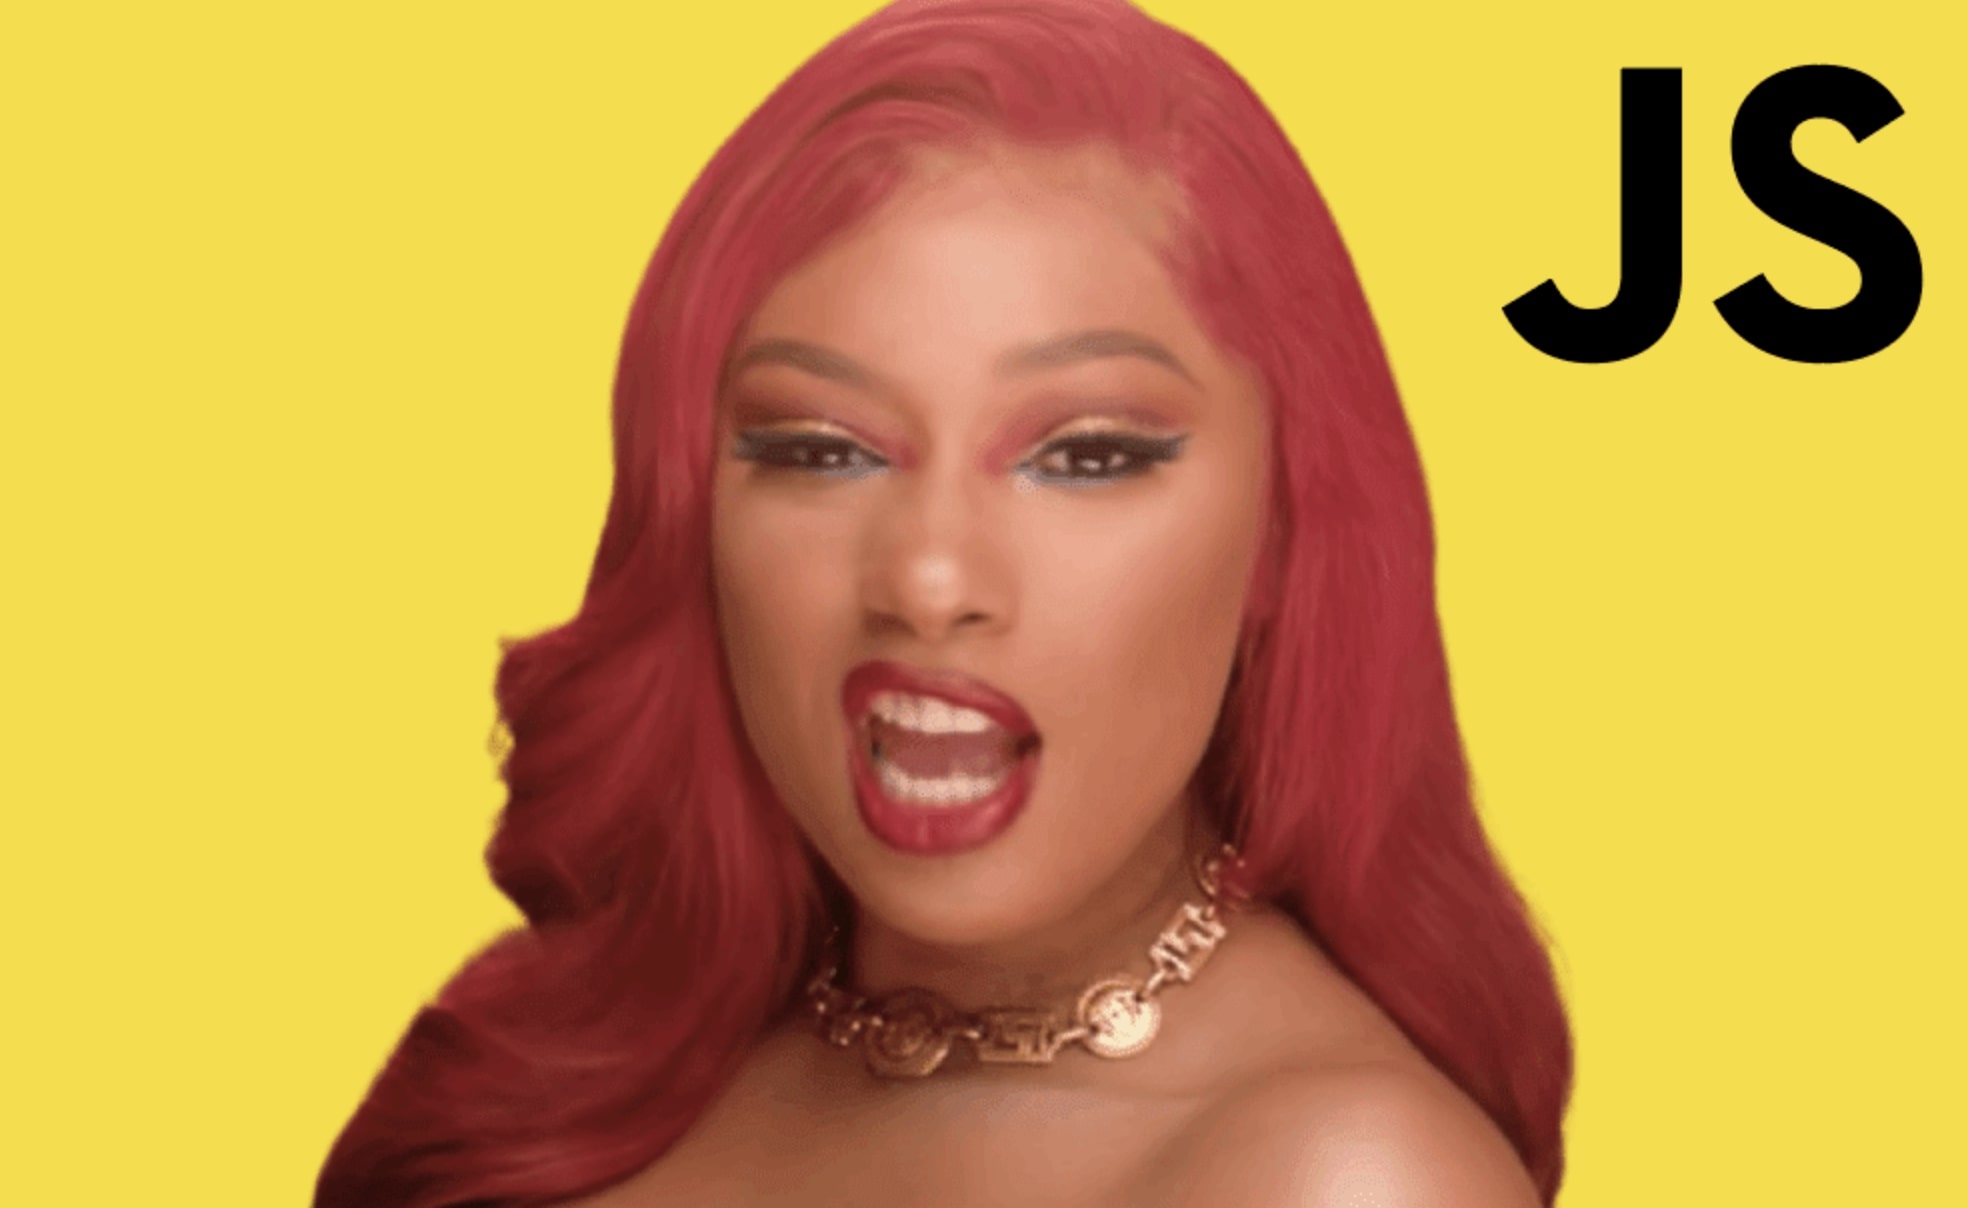 Megan Thee Stallion in front of the JavaScript logo